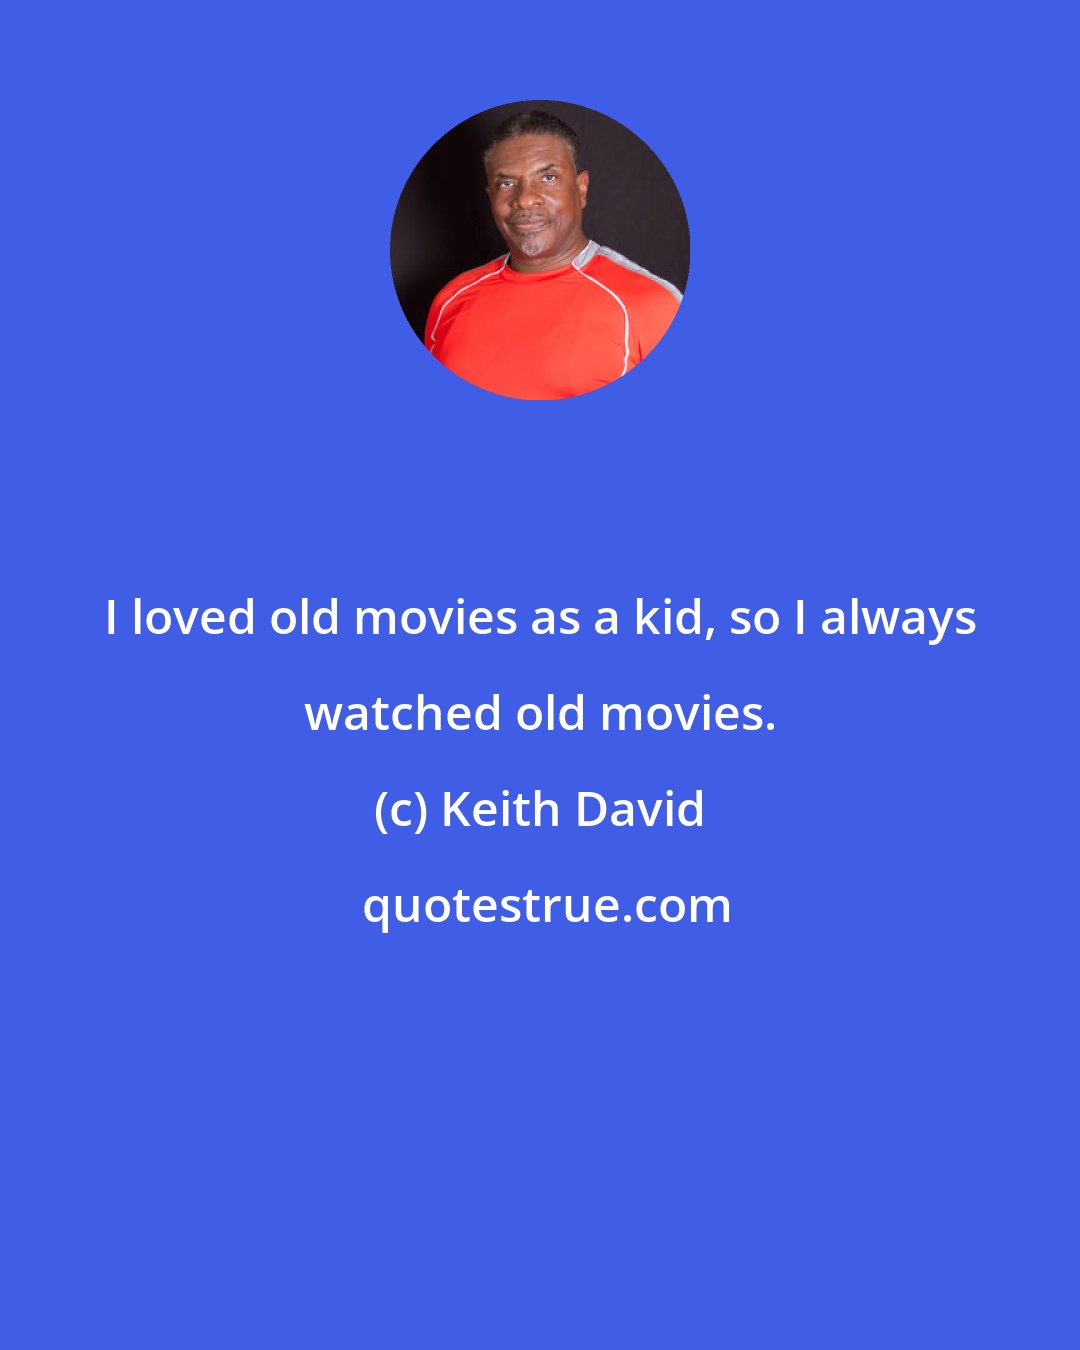 Keith David: I loved old movies as a kid, so I always watched old movies.